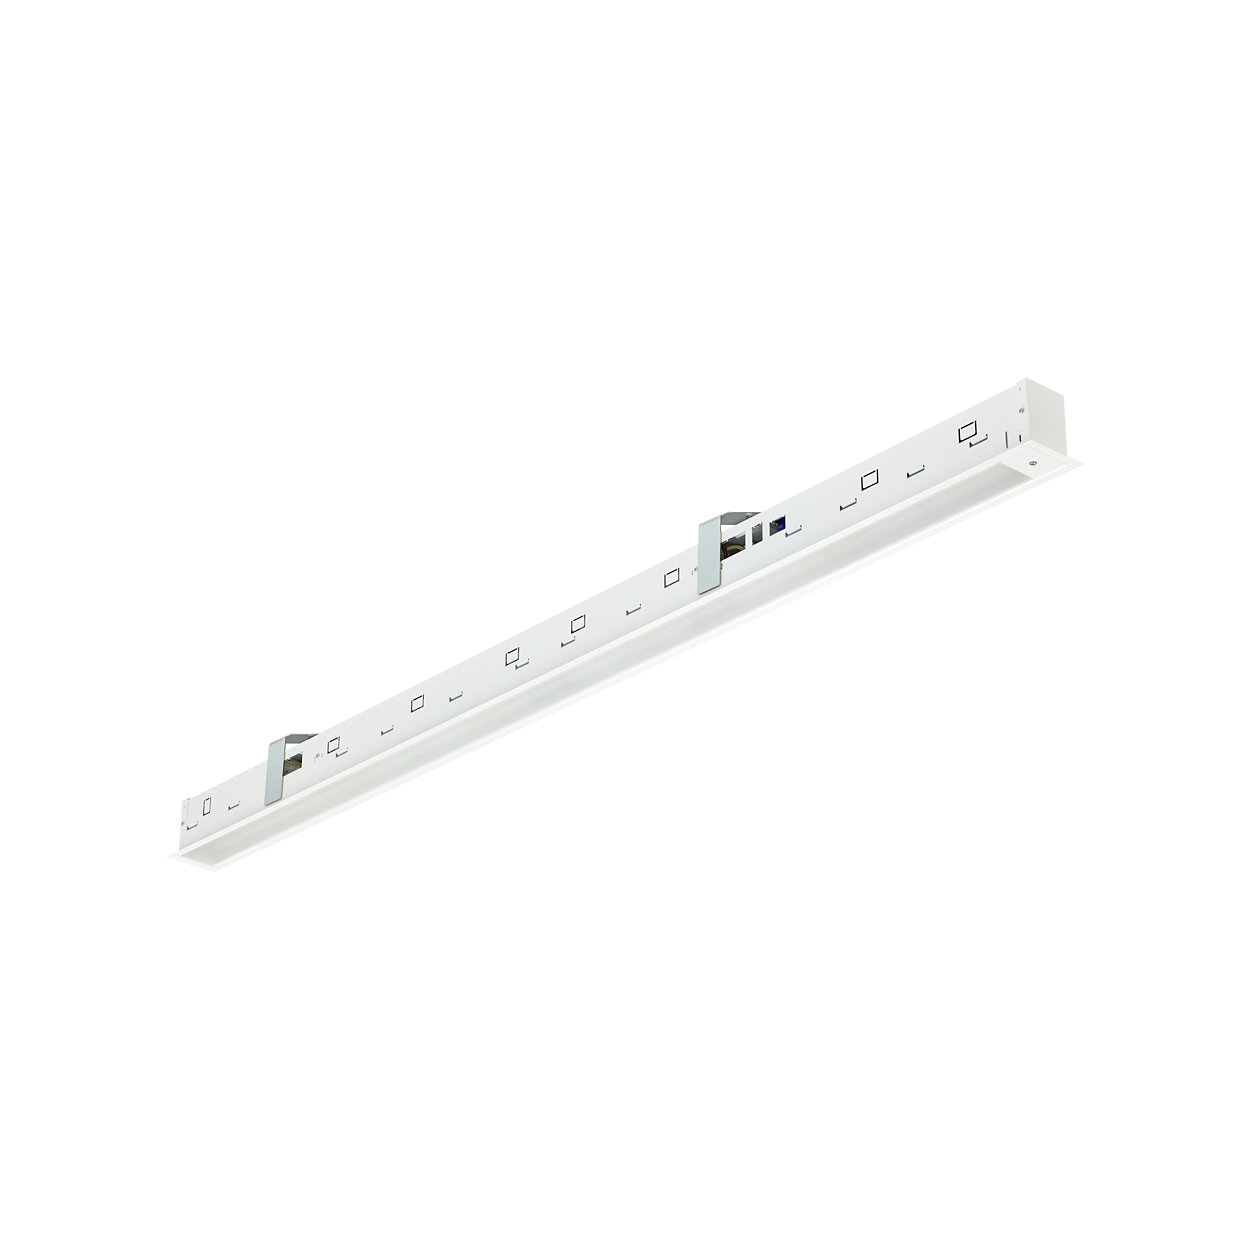 TrueLine, recessed - True line of light: elegant, energy-efficient and compliant with office lighting norms